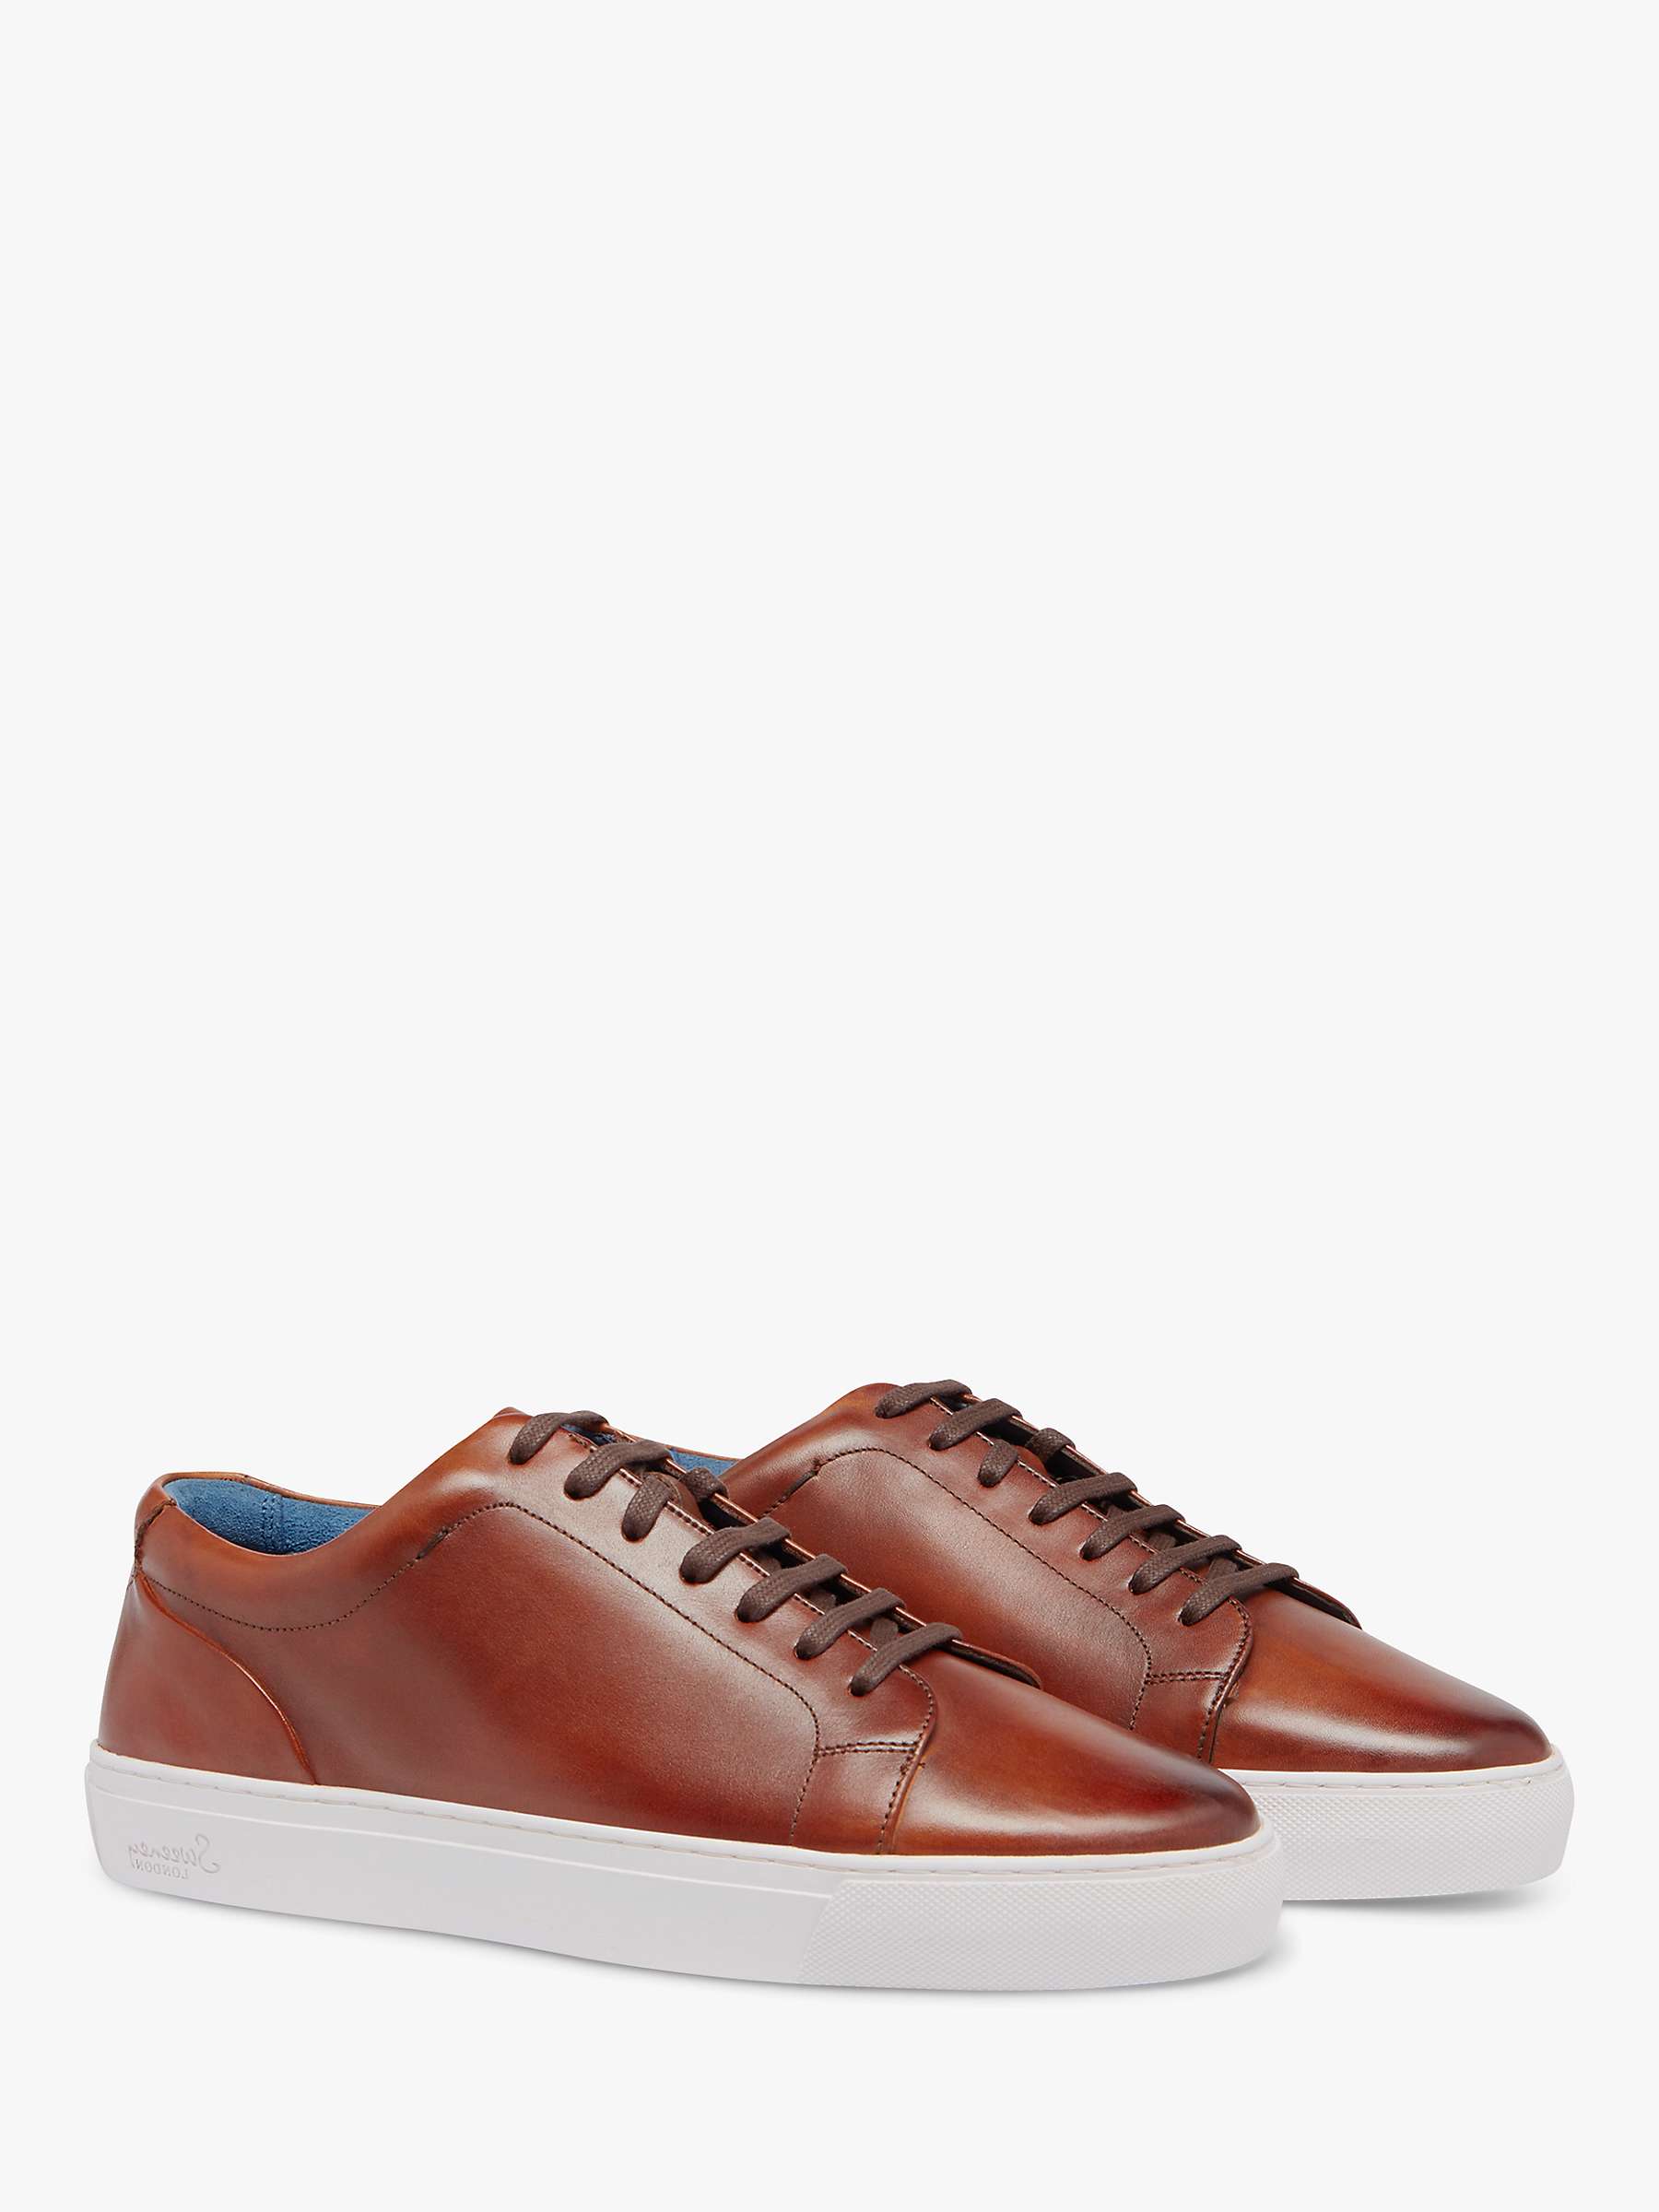 Oliver Sweeney Hayle Leather Trainers, Cognac at John Lewis & Partners